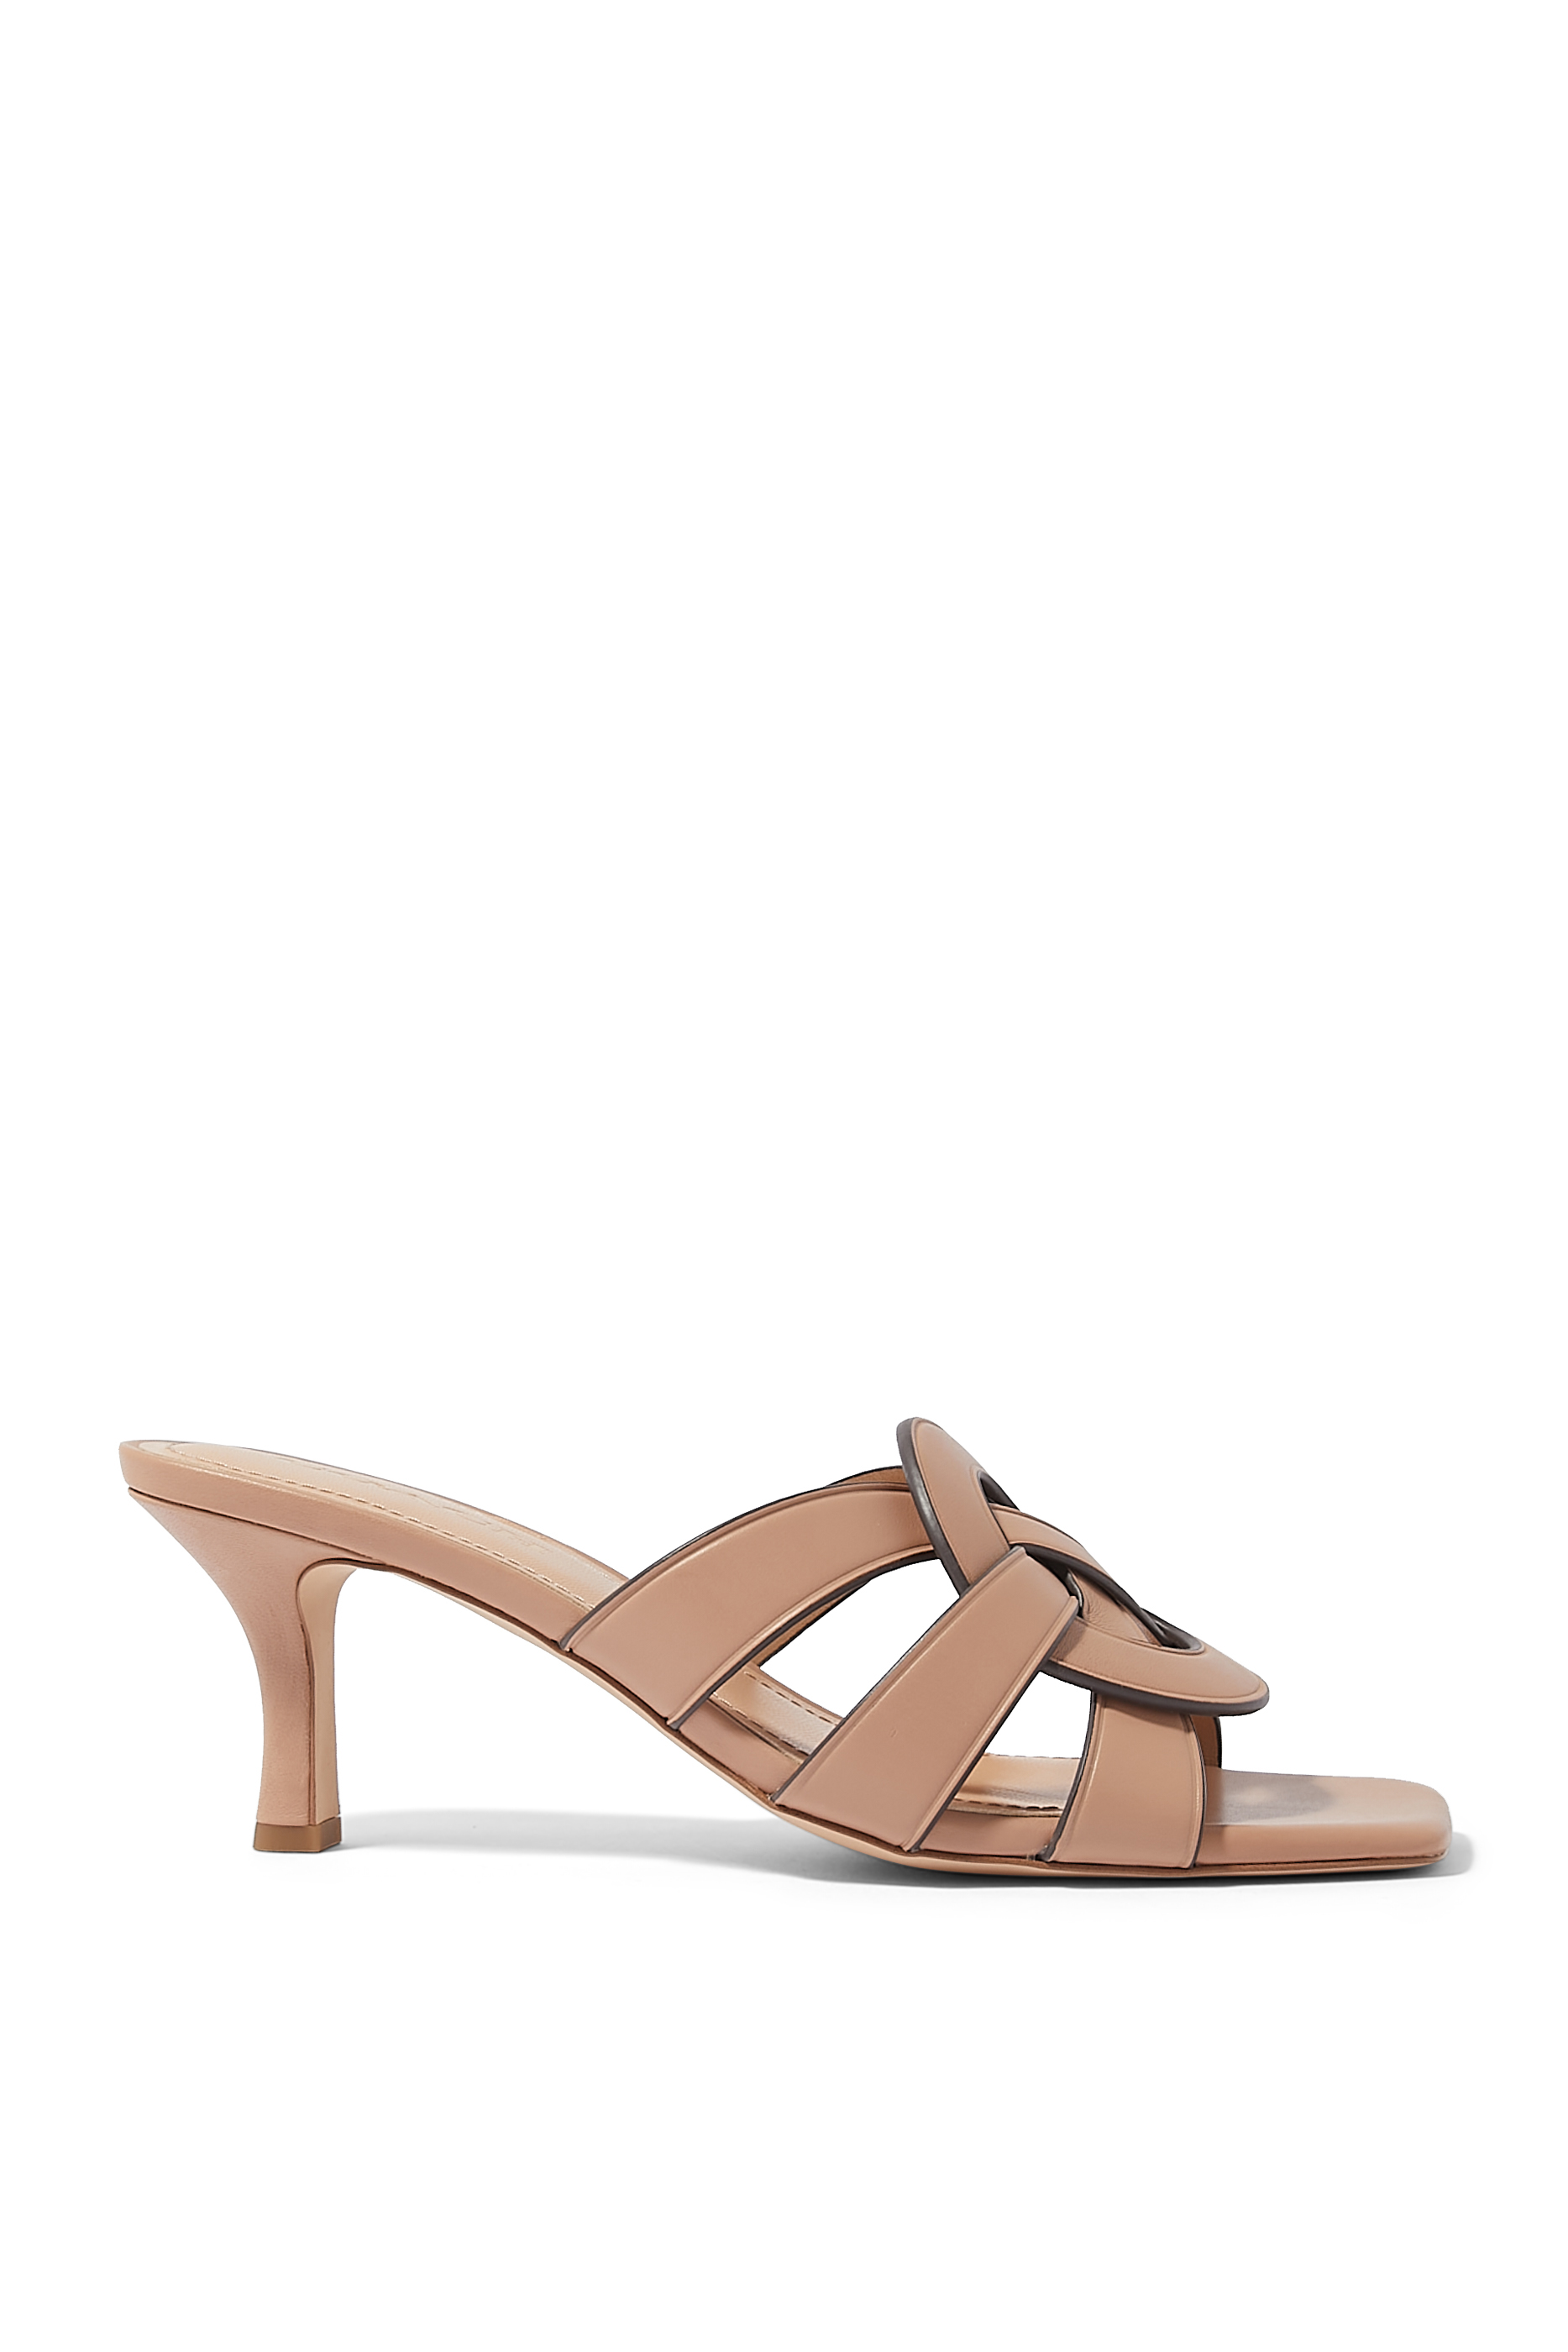 Buy Coach Tillie C 60 Leather Sandals for Womens | Bloomingdale's UAE